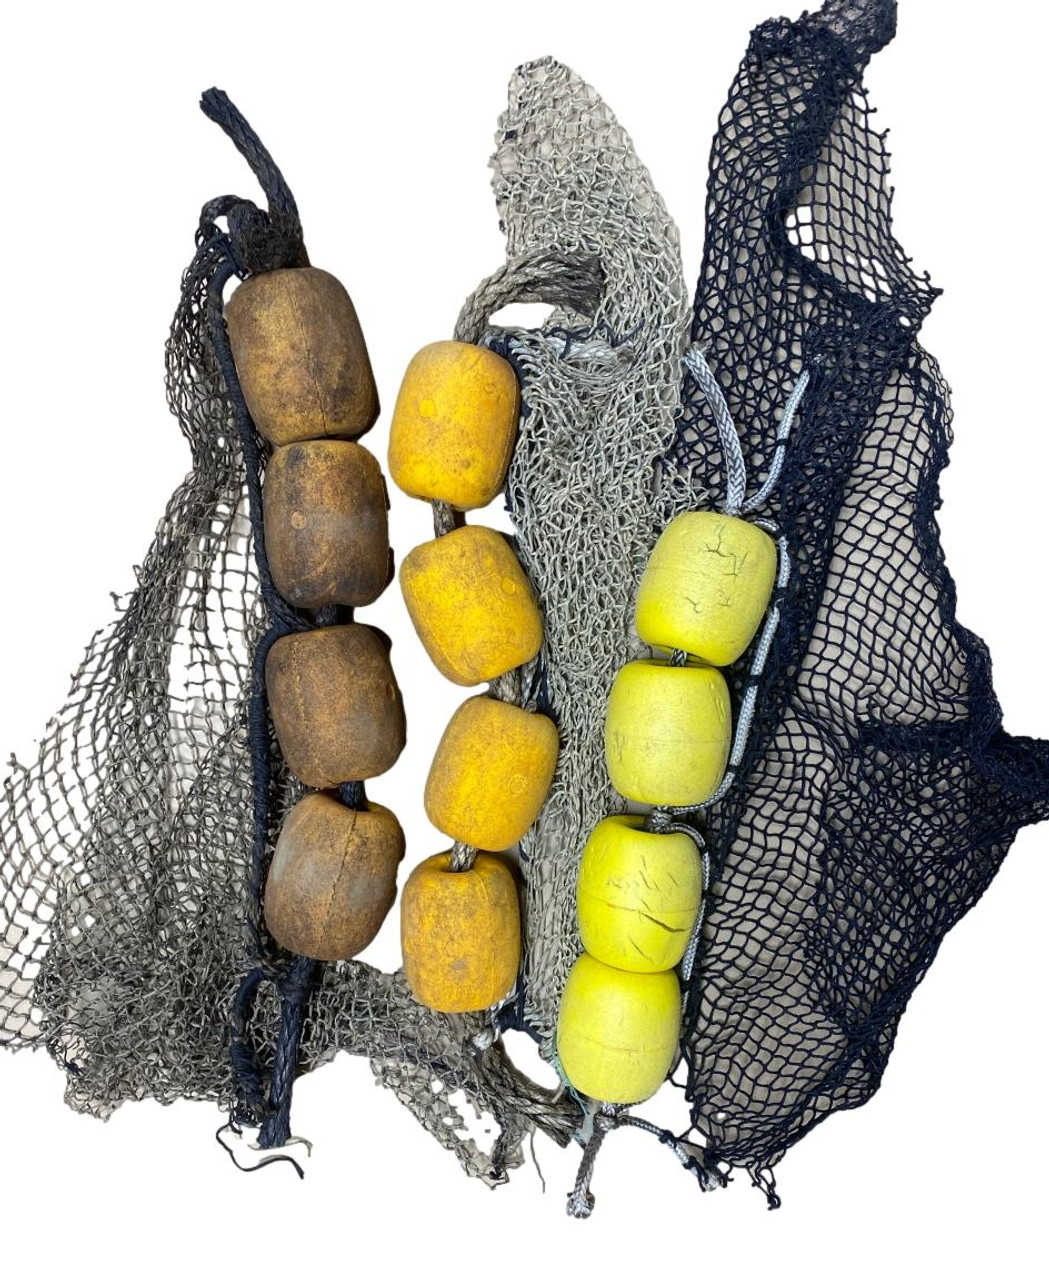 Fishing Net with attached cork floats, ca. 1945 - Maine Memory Network